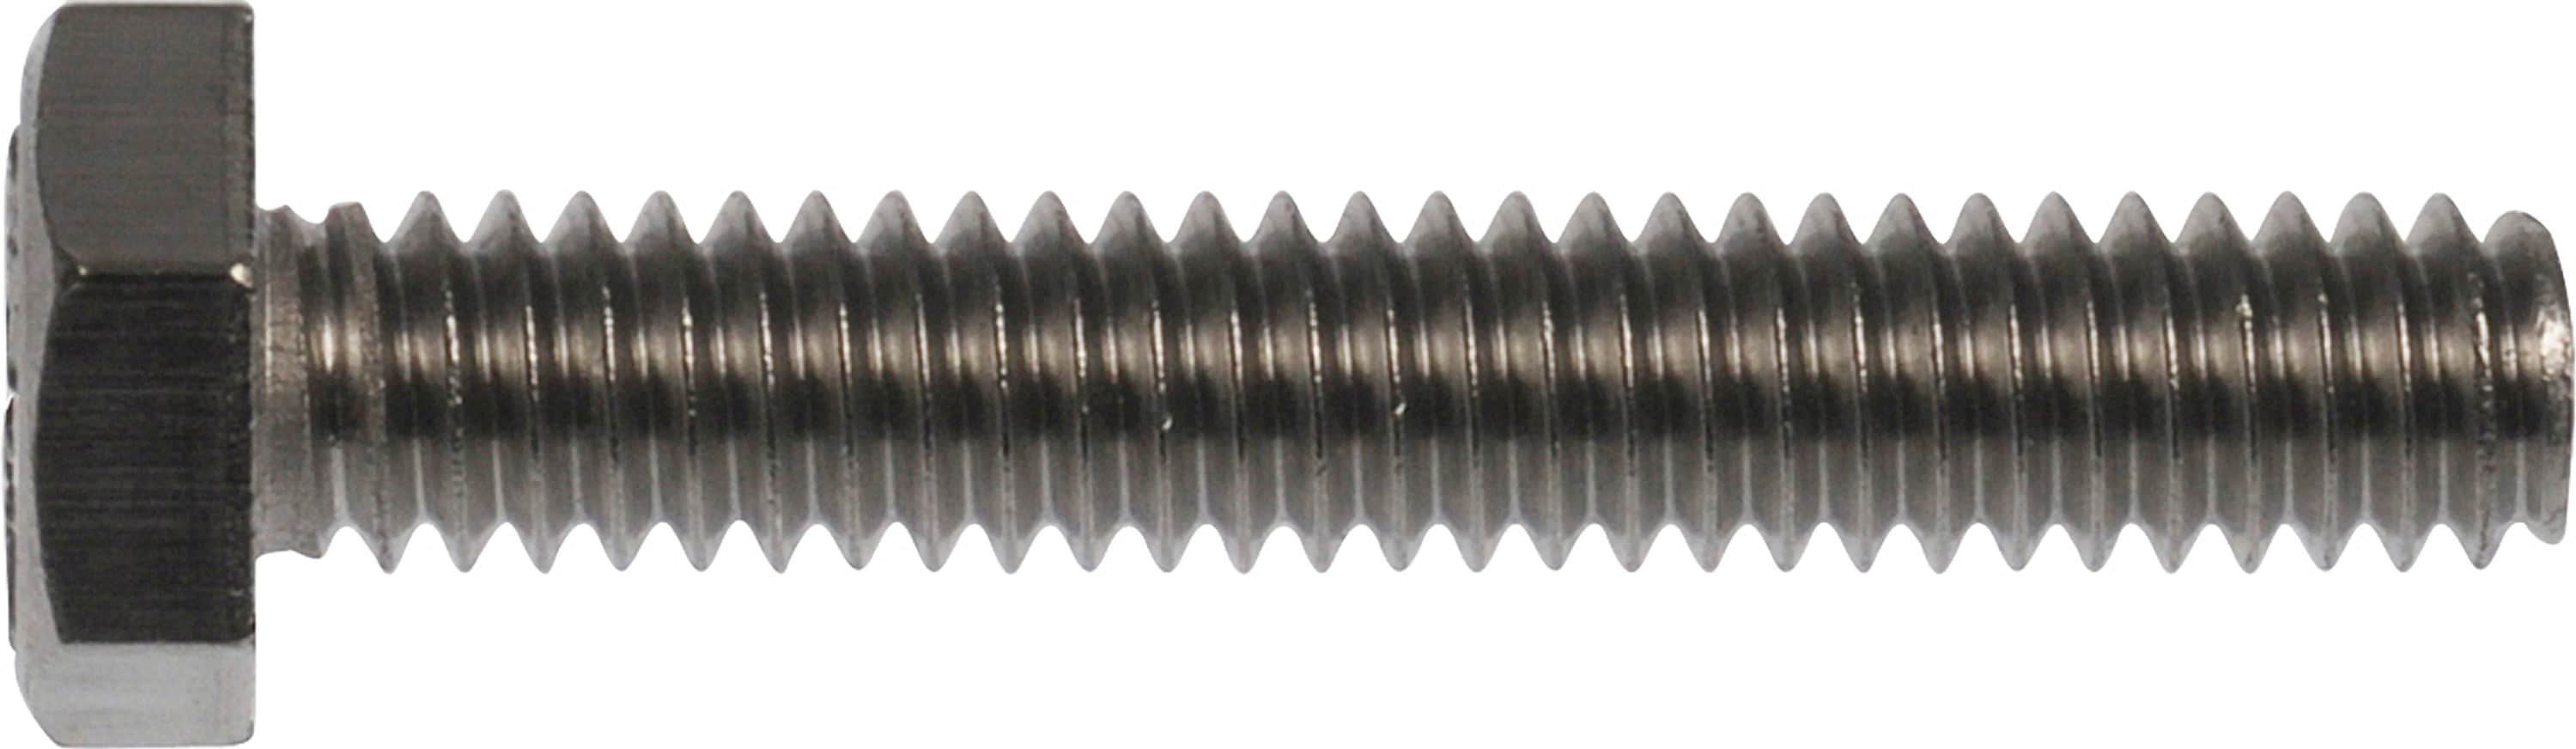 Hillman 38 In X 4 In Stainless Coarse Thread Hex Bolt 2 Count In The Hex Bolts Department At